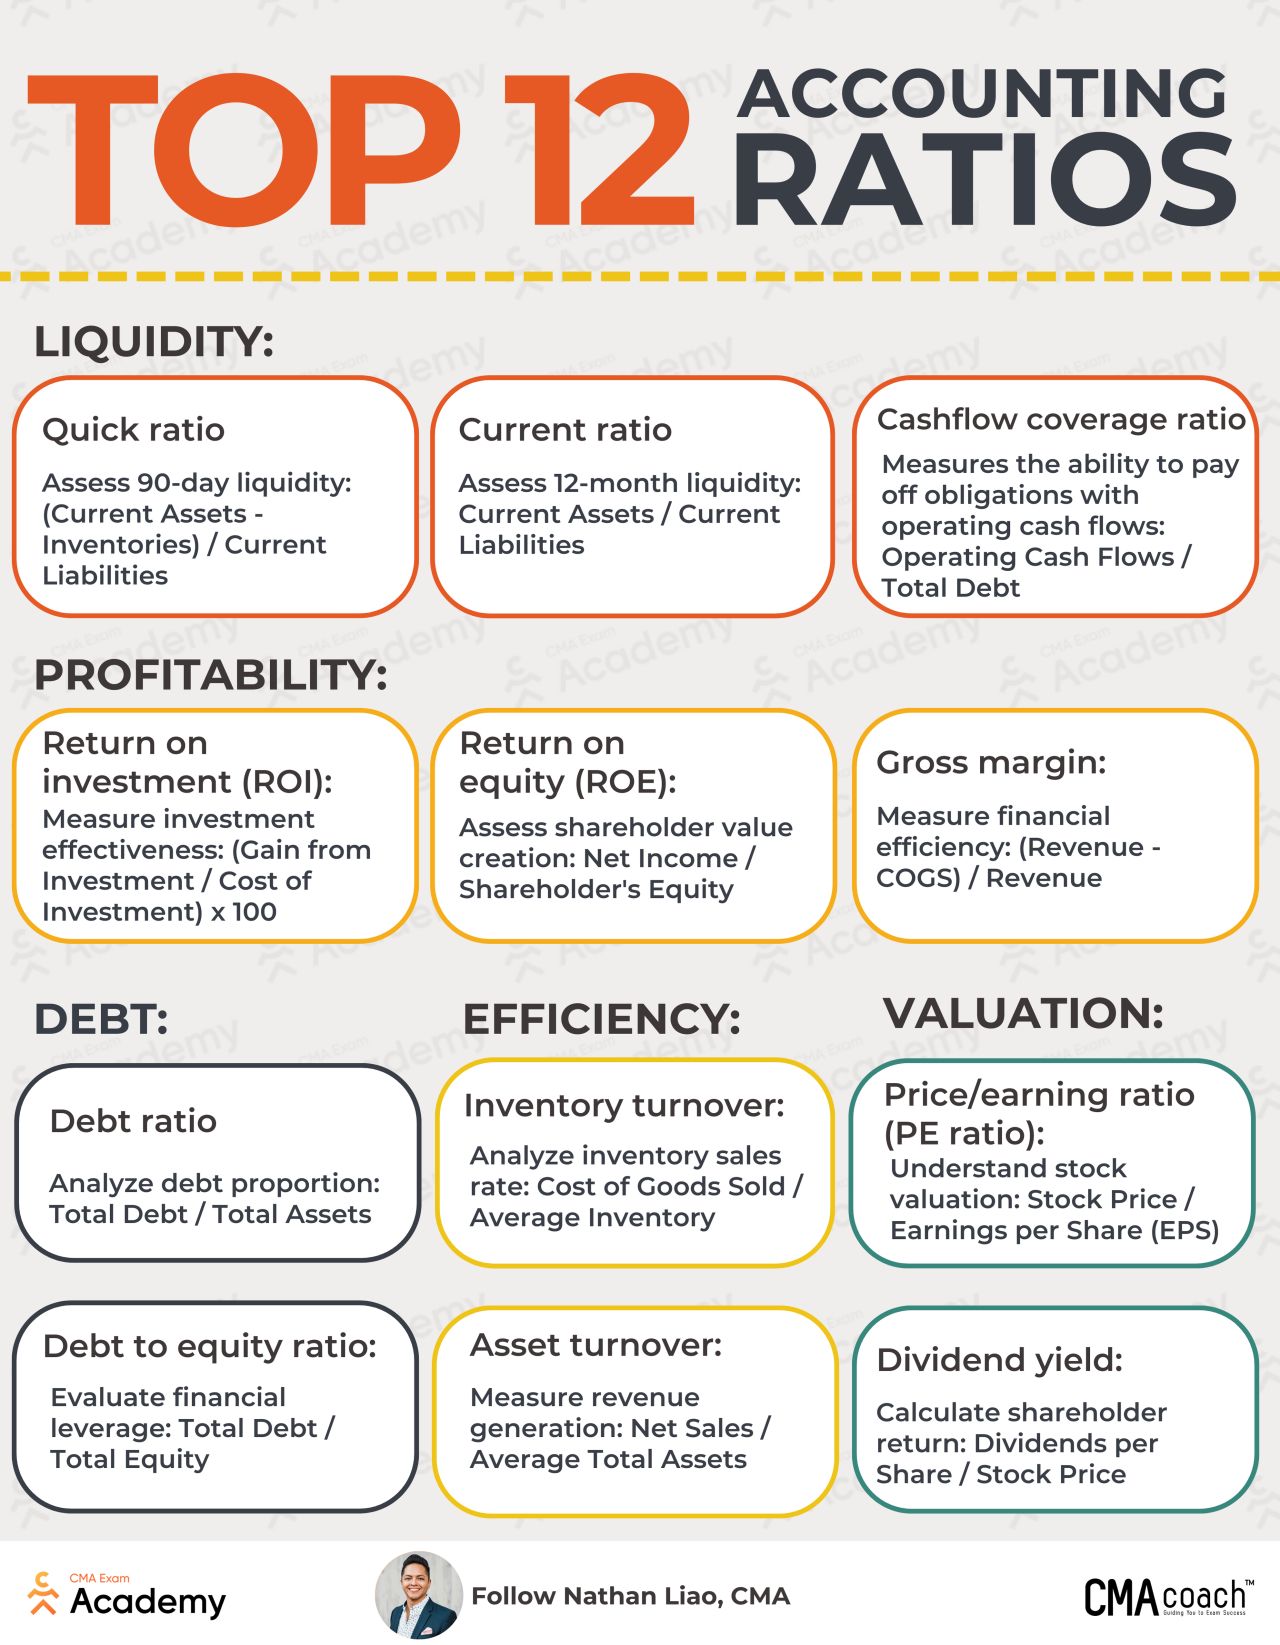 Top 12 Accounting Ratios Infographic